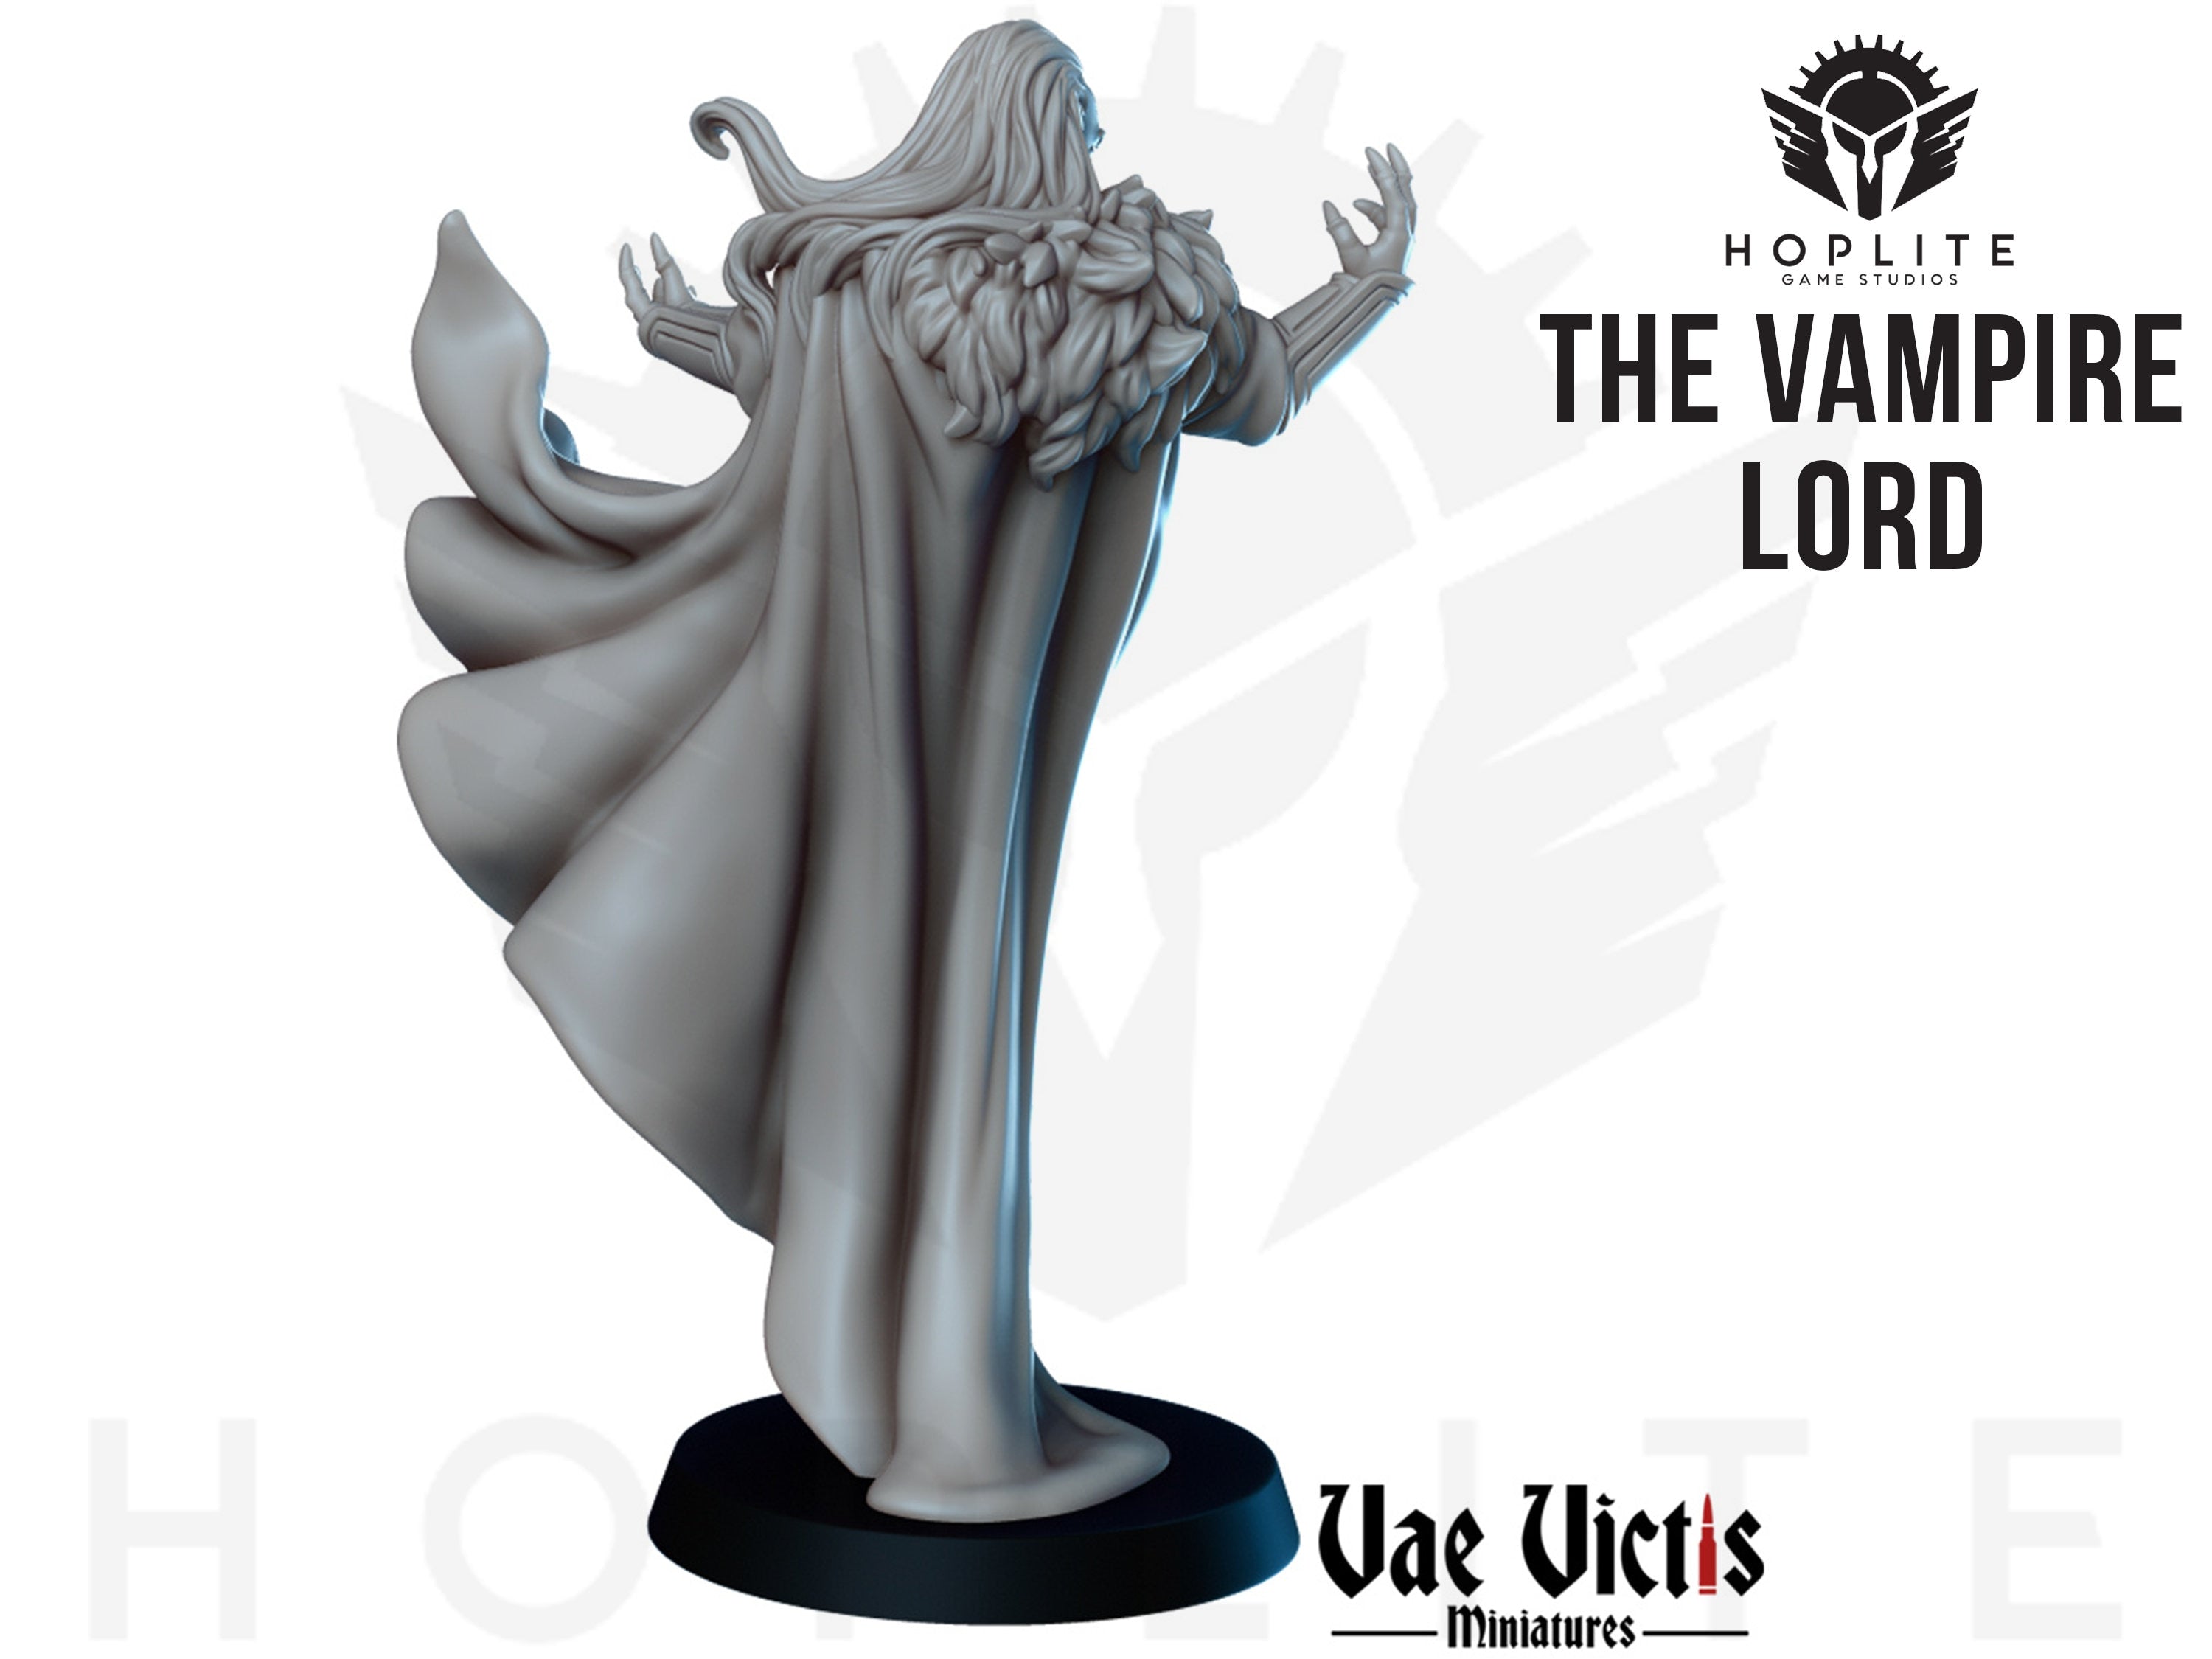 The Vampire Lord